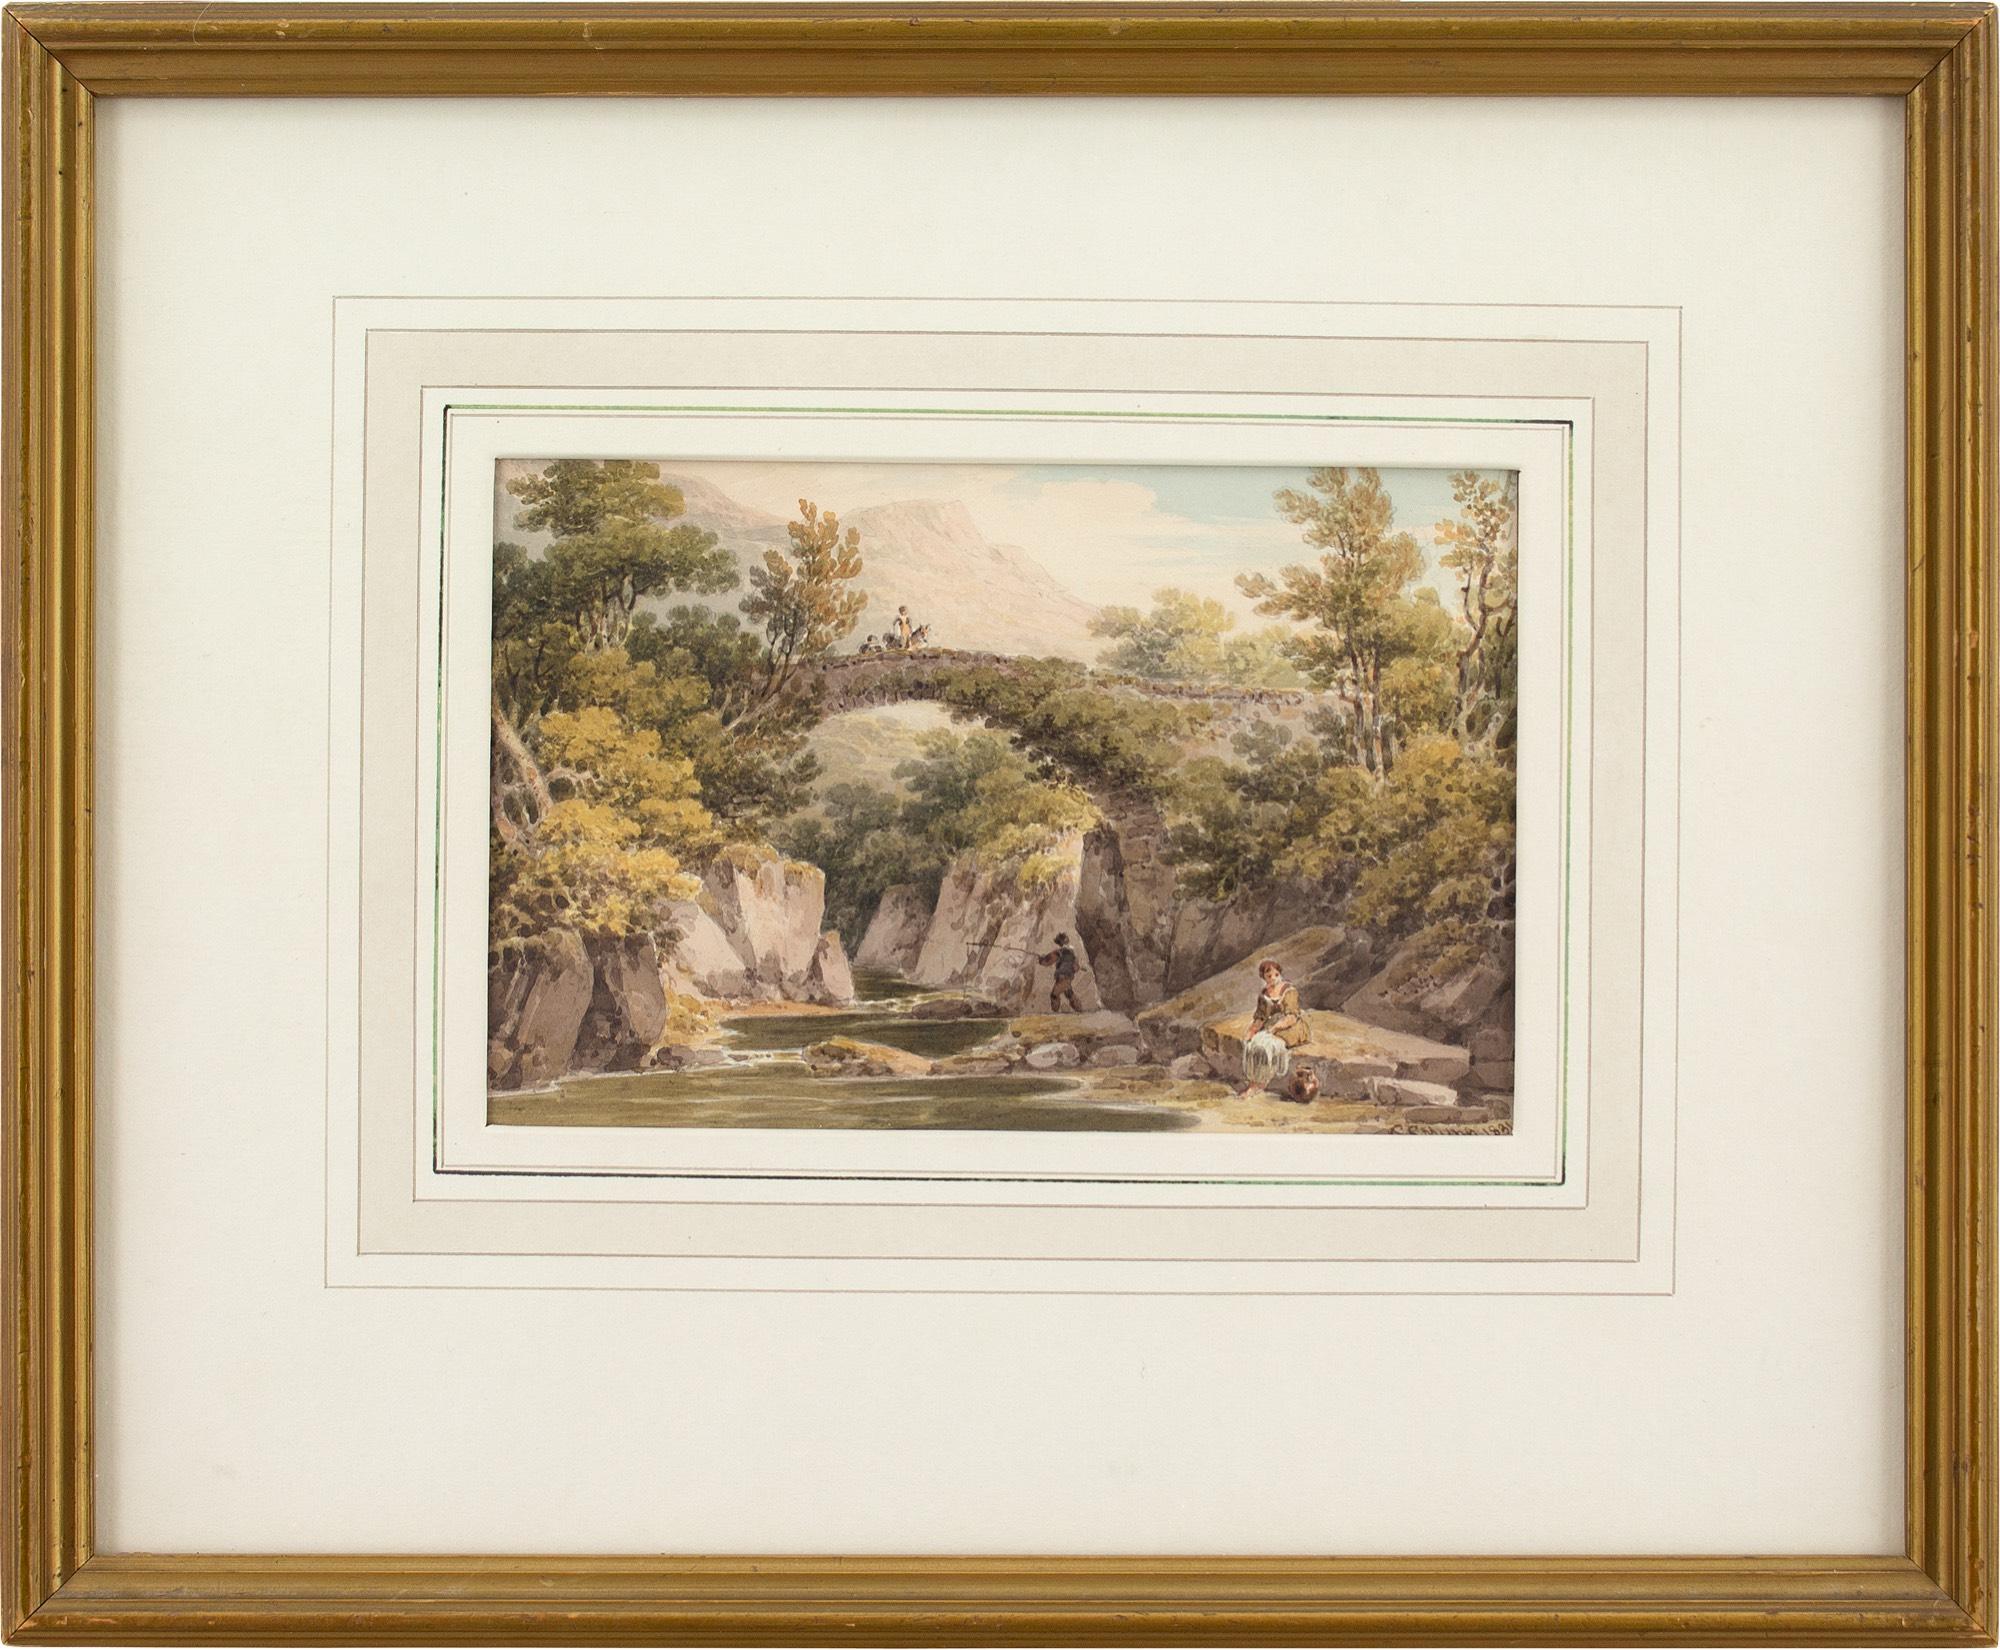 This early 19th-century watercolour by British artist Paul Sandby Munn RWS (1773-1845) depicts a riverside view at Mallevy in North Wales.

Amid a hasty world where technology consumes our waking hours, few of us find the time to consider the subtle